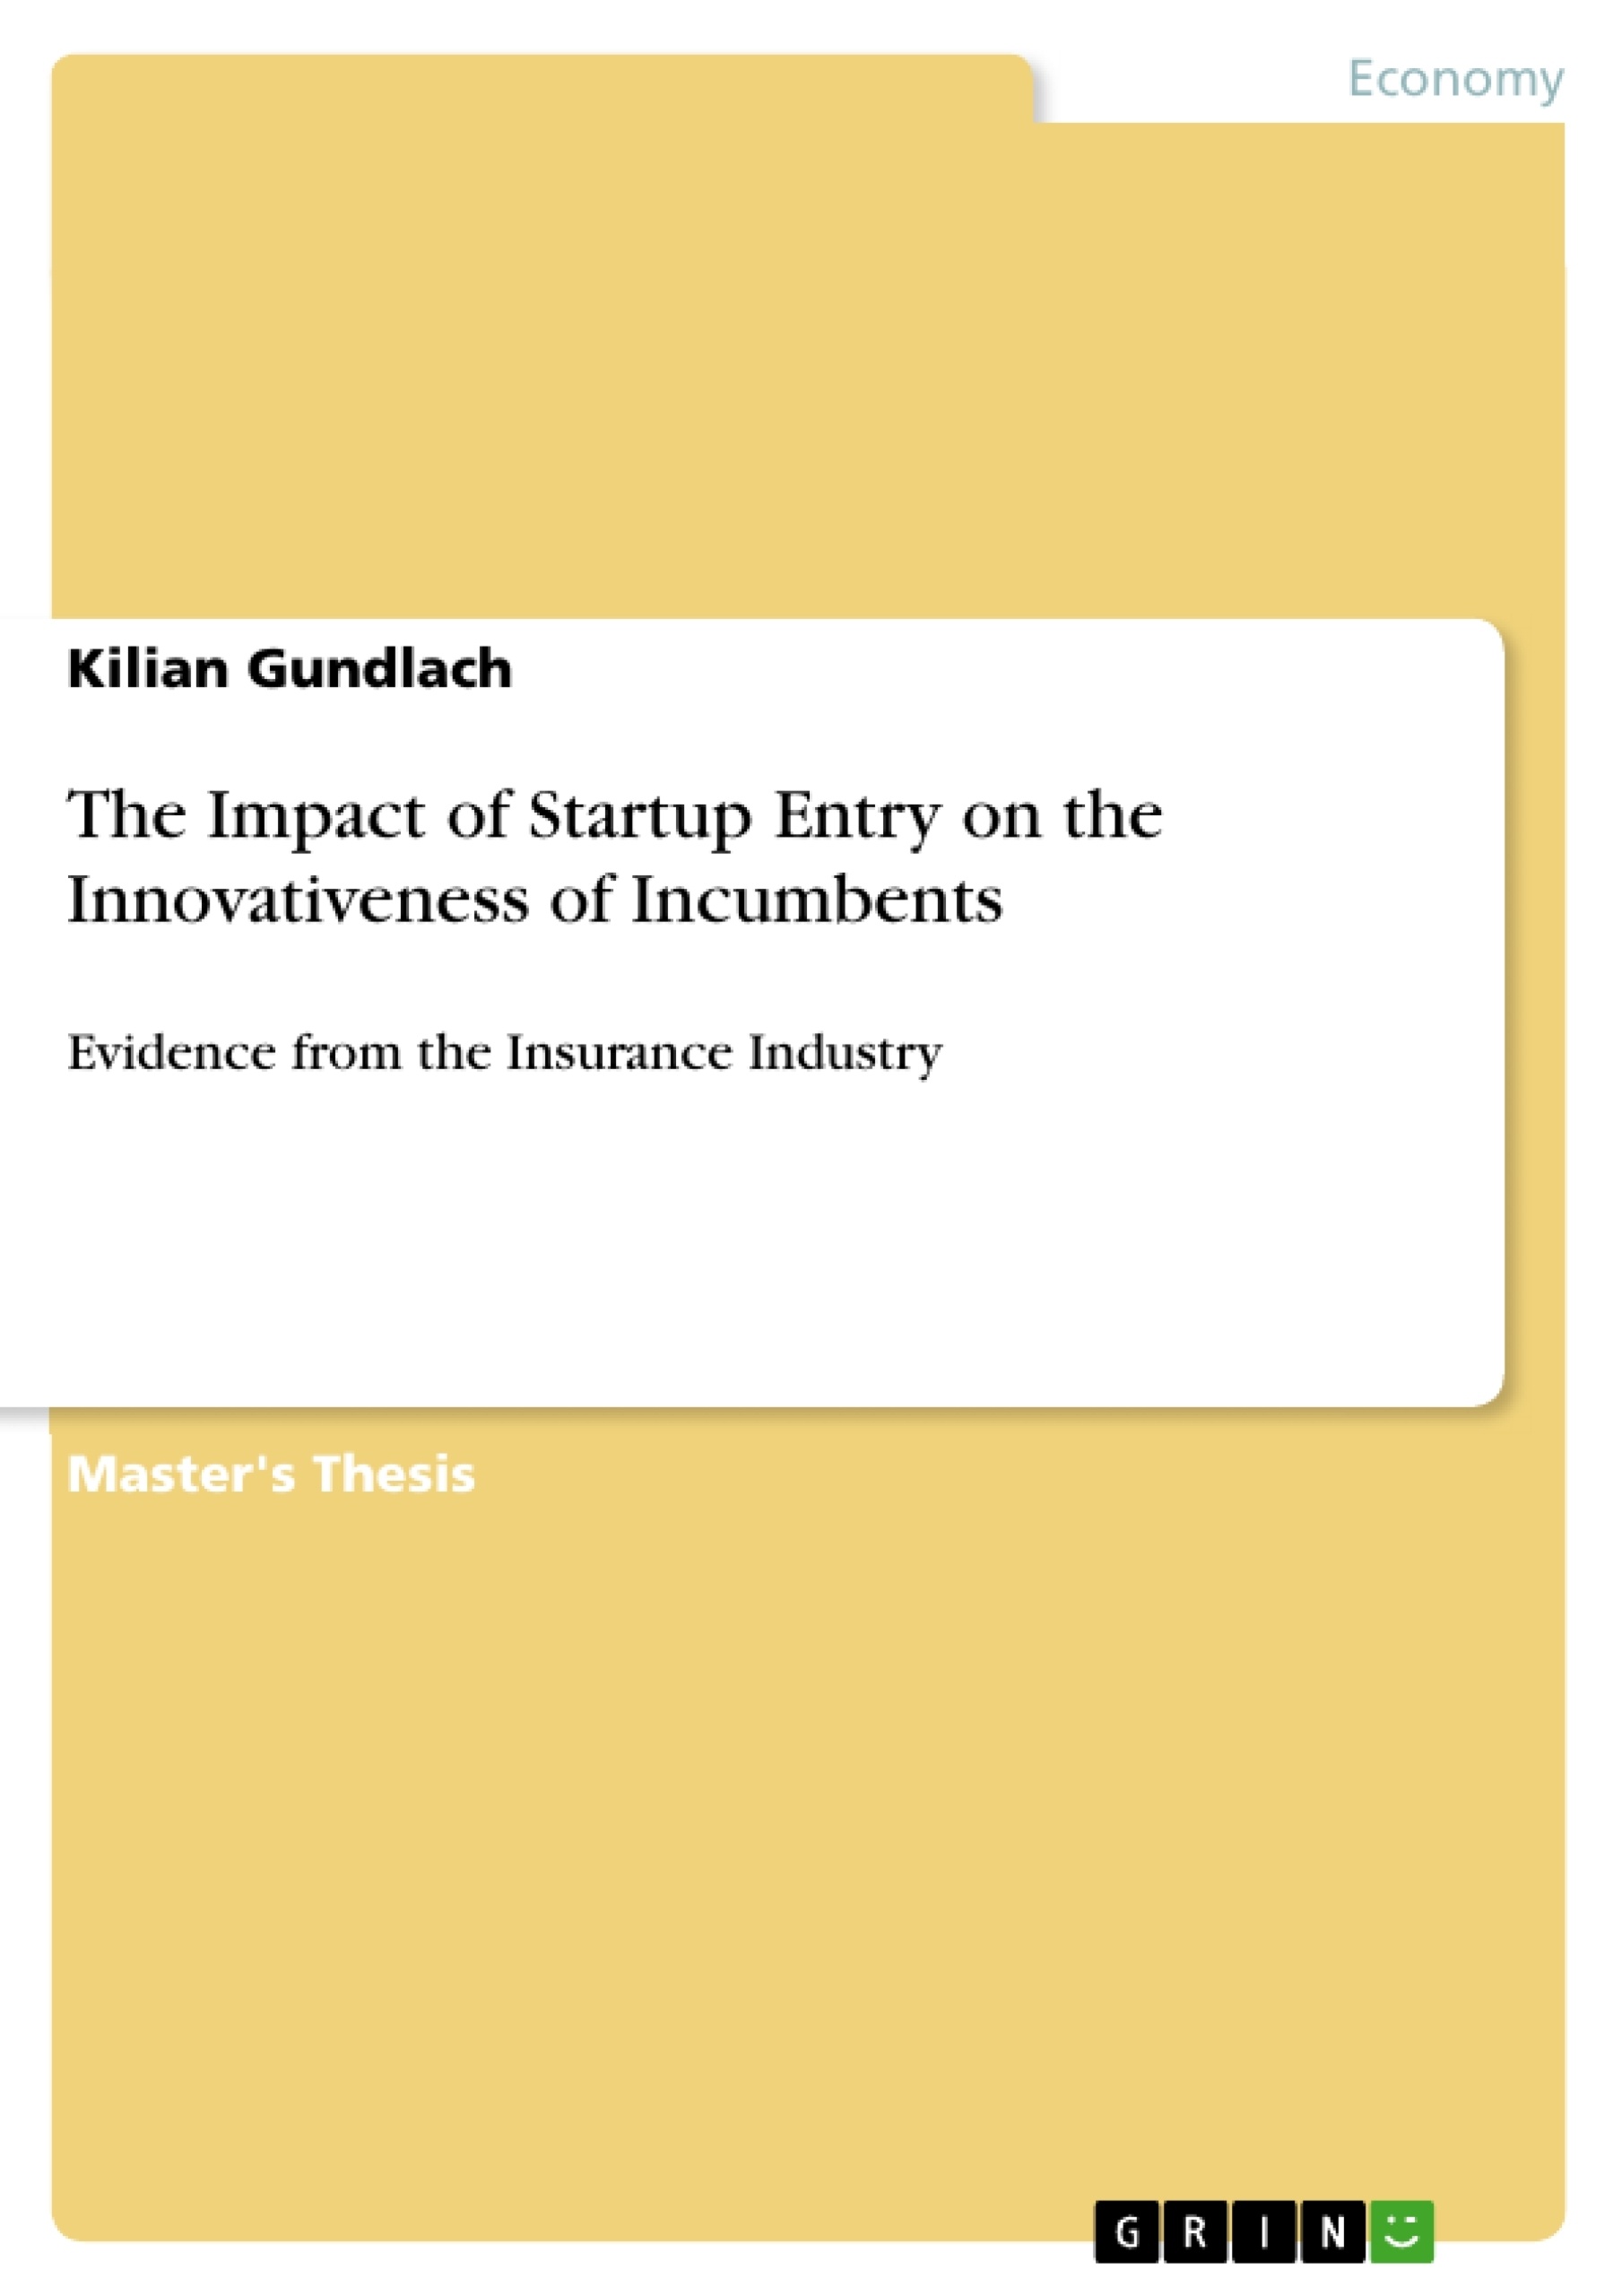 Titre: The Impact of Startup Entry on the Innovativeness of Incumbents